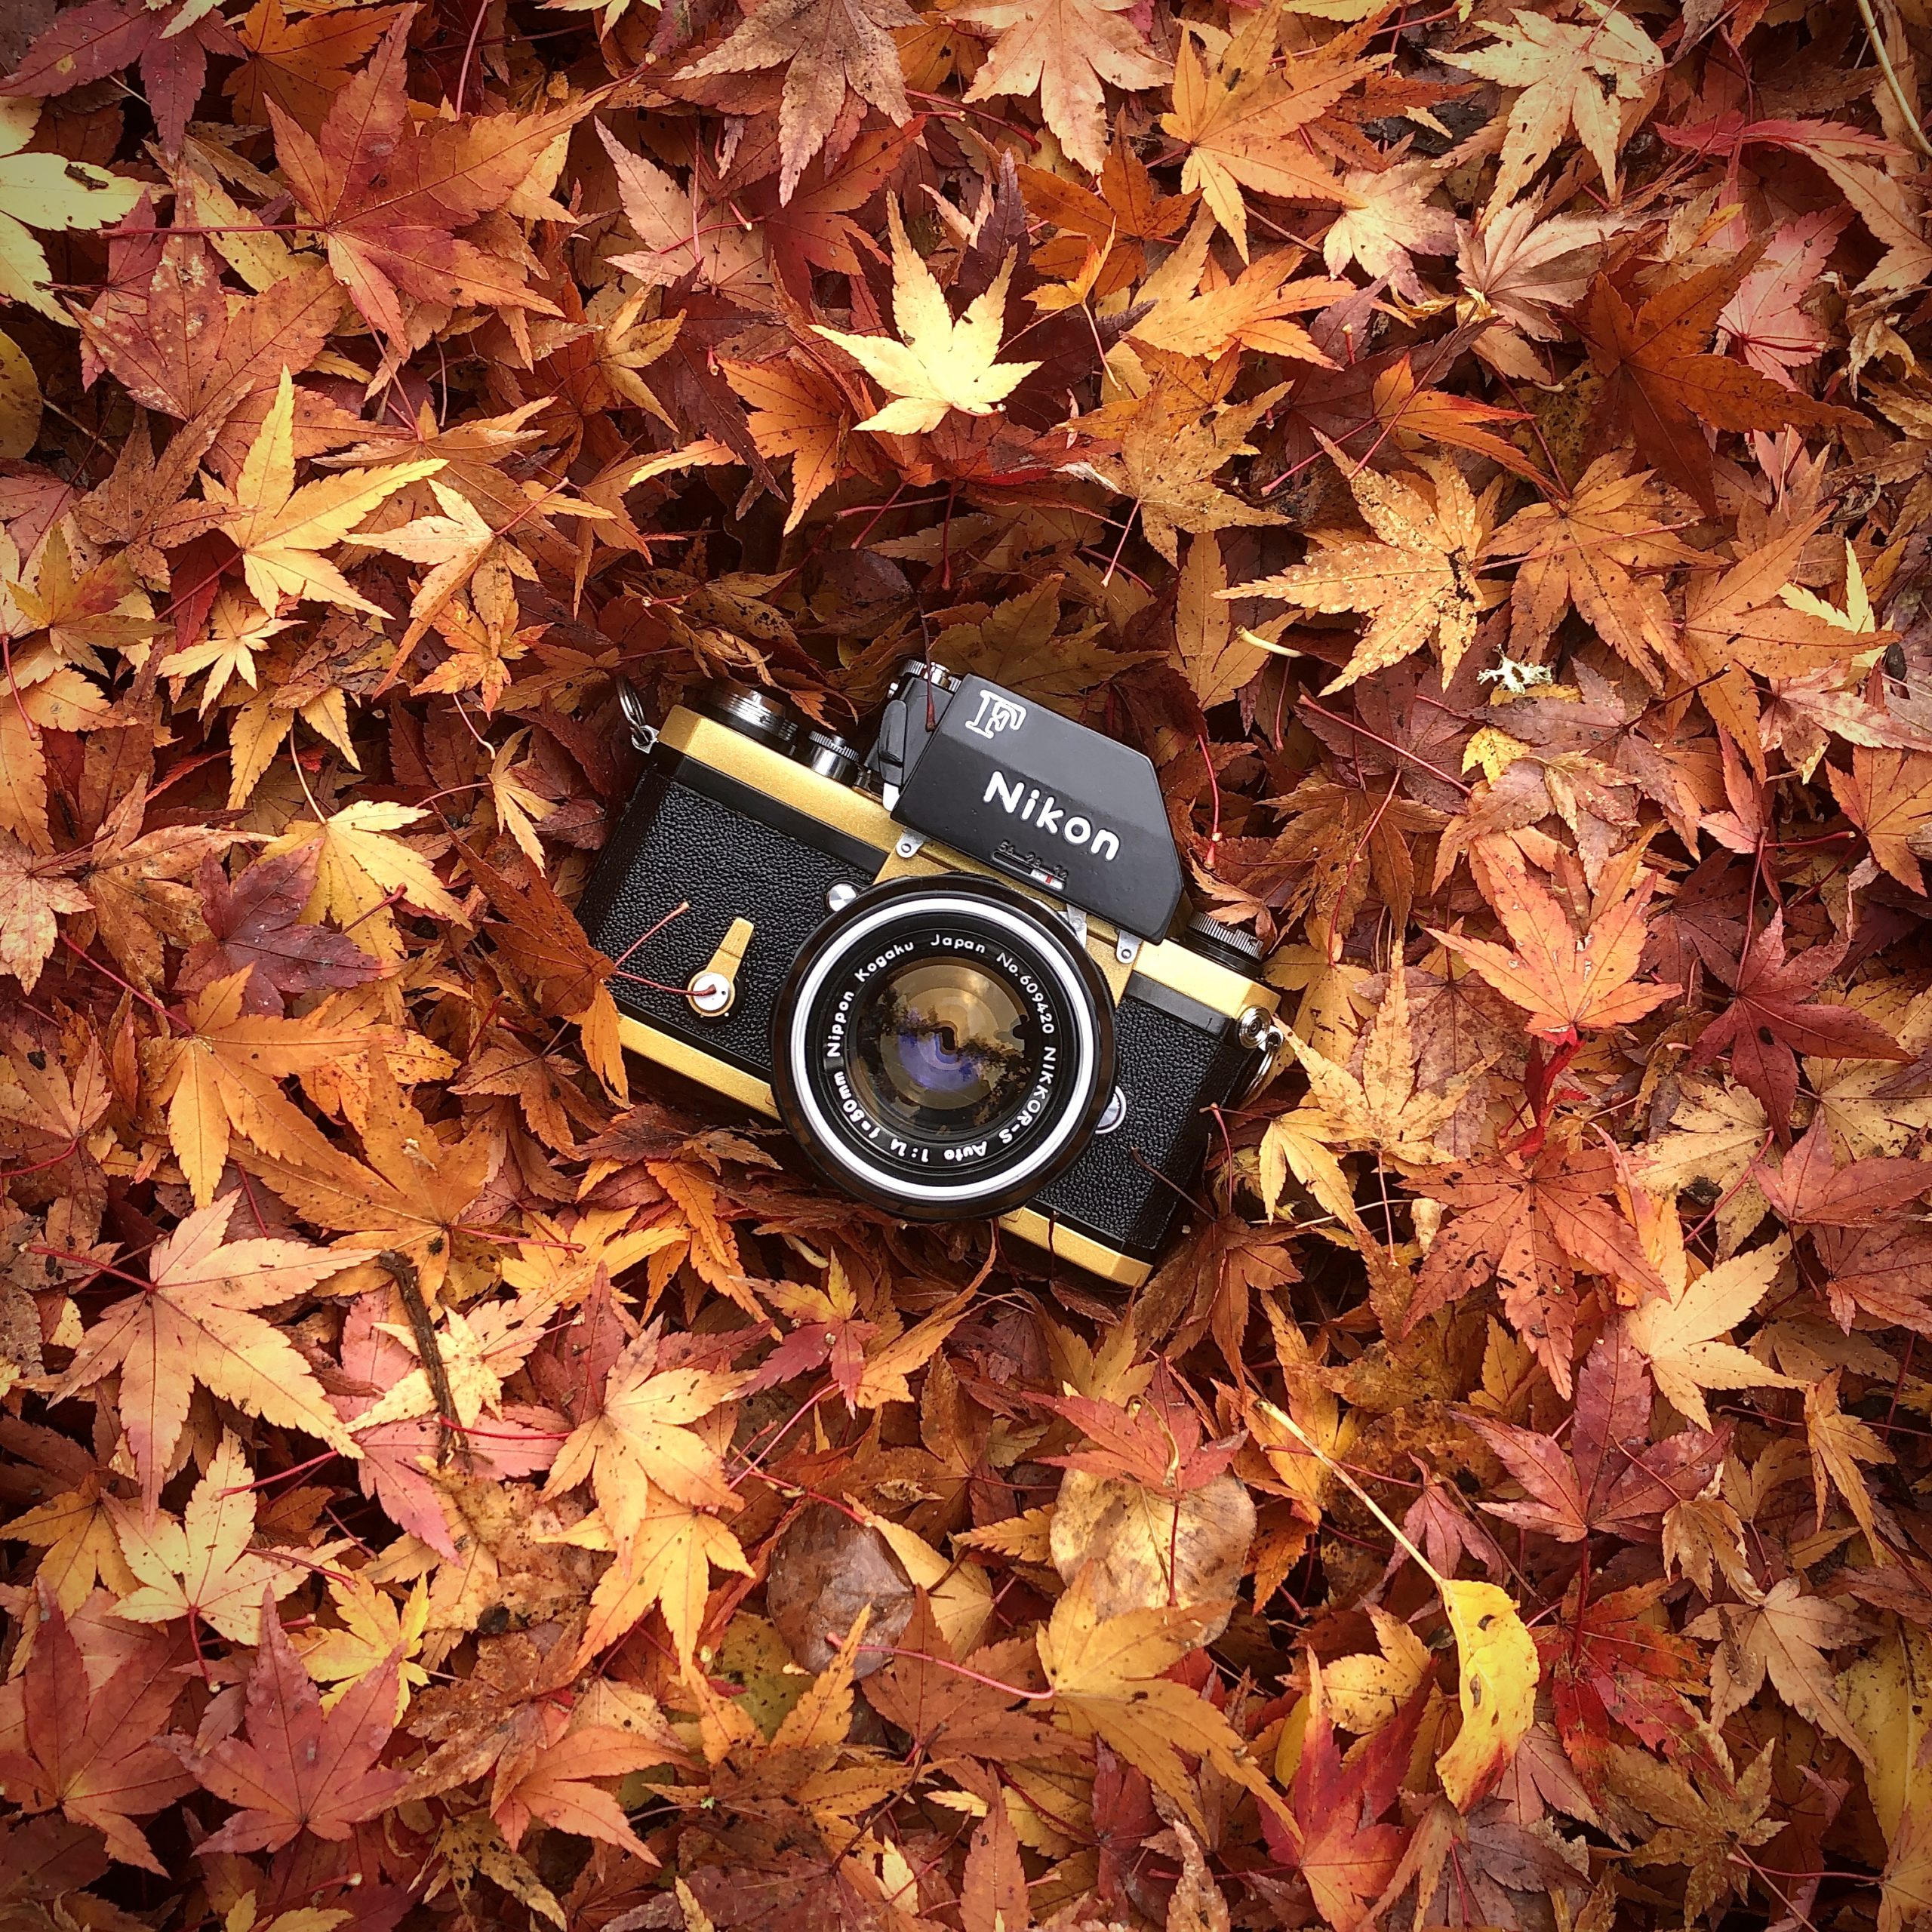 And the Winner of This Gorgeous Nikon Camera Is…